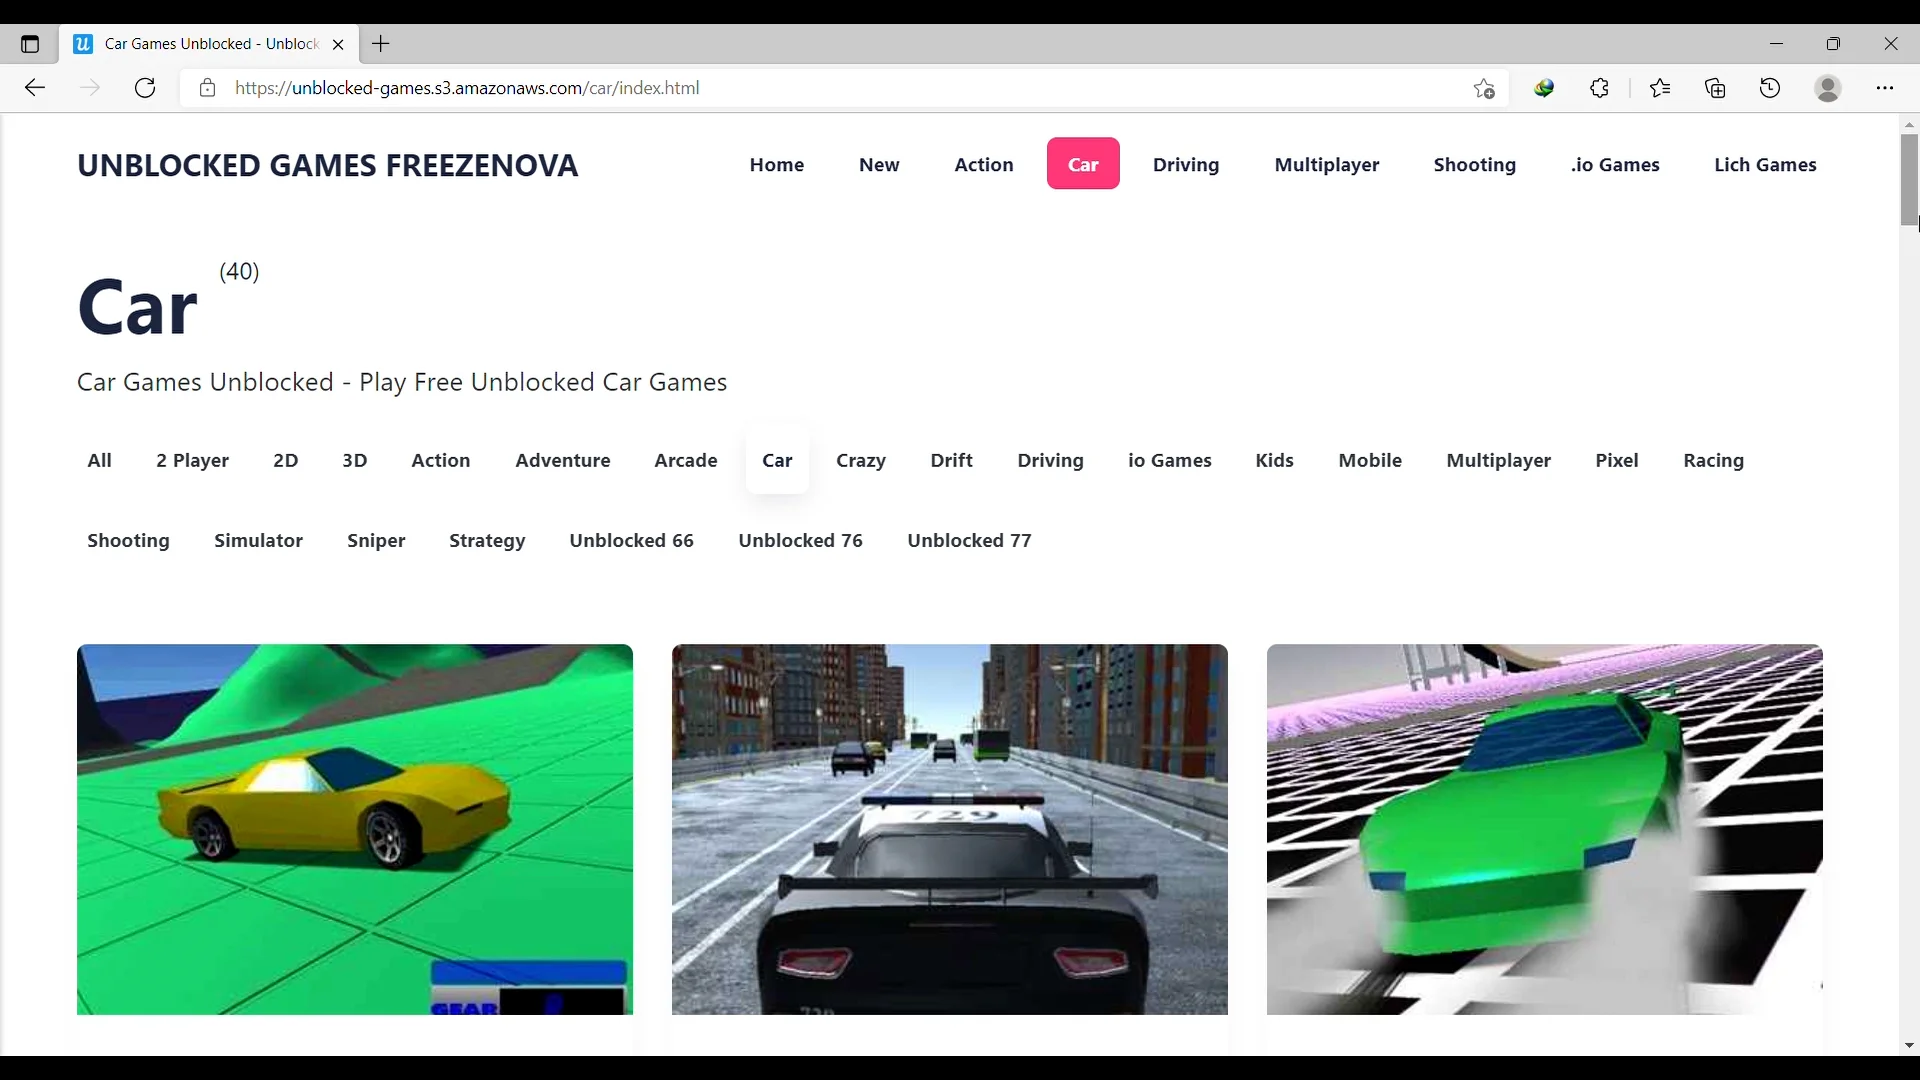 Freezenova the best gaming website with an amazing collection of